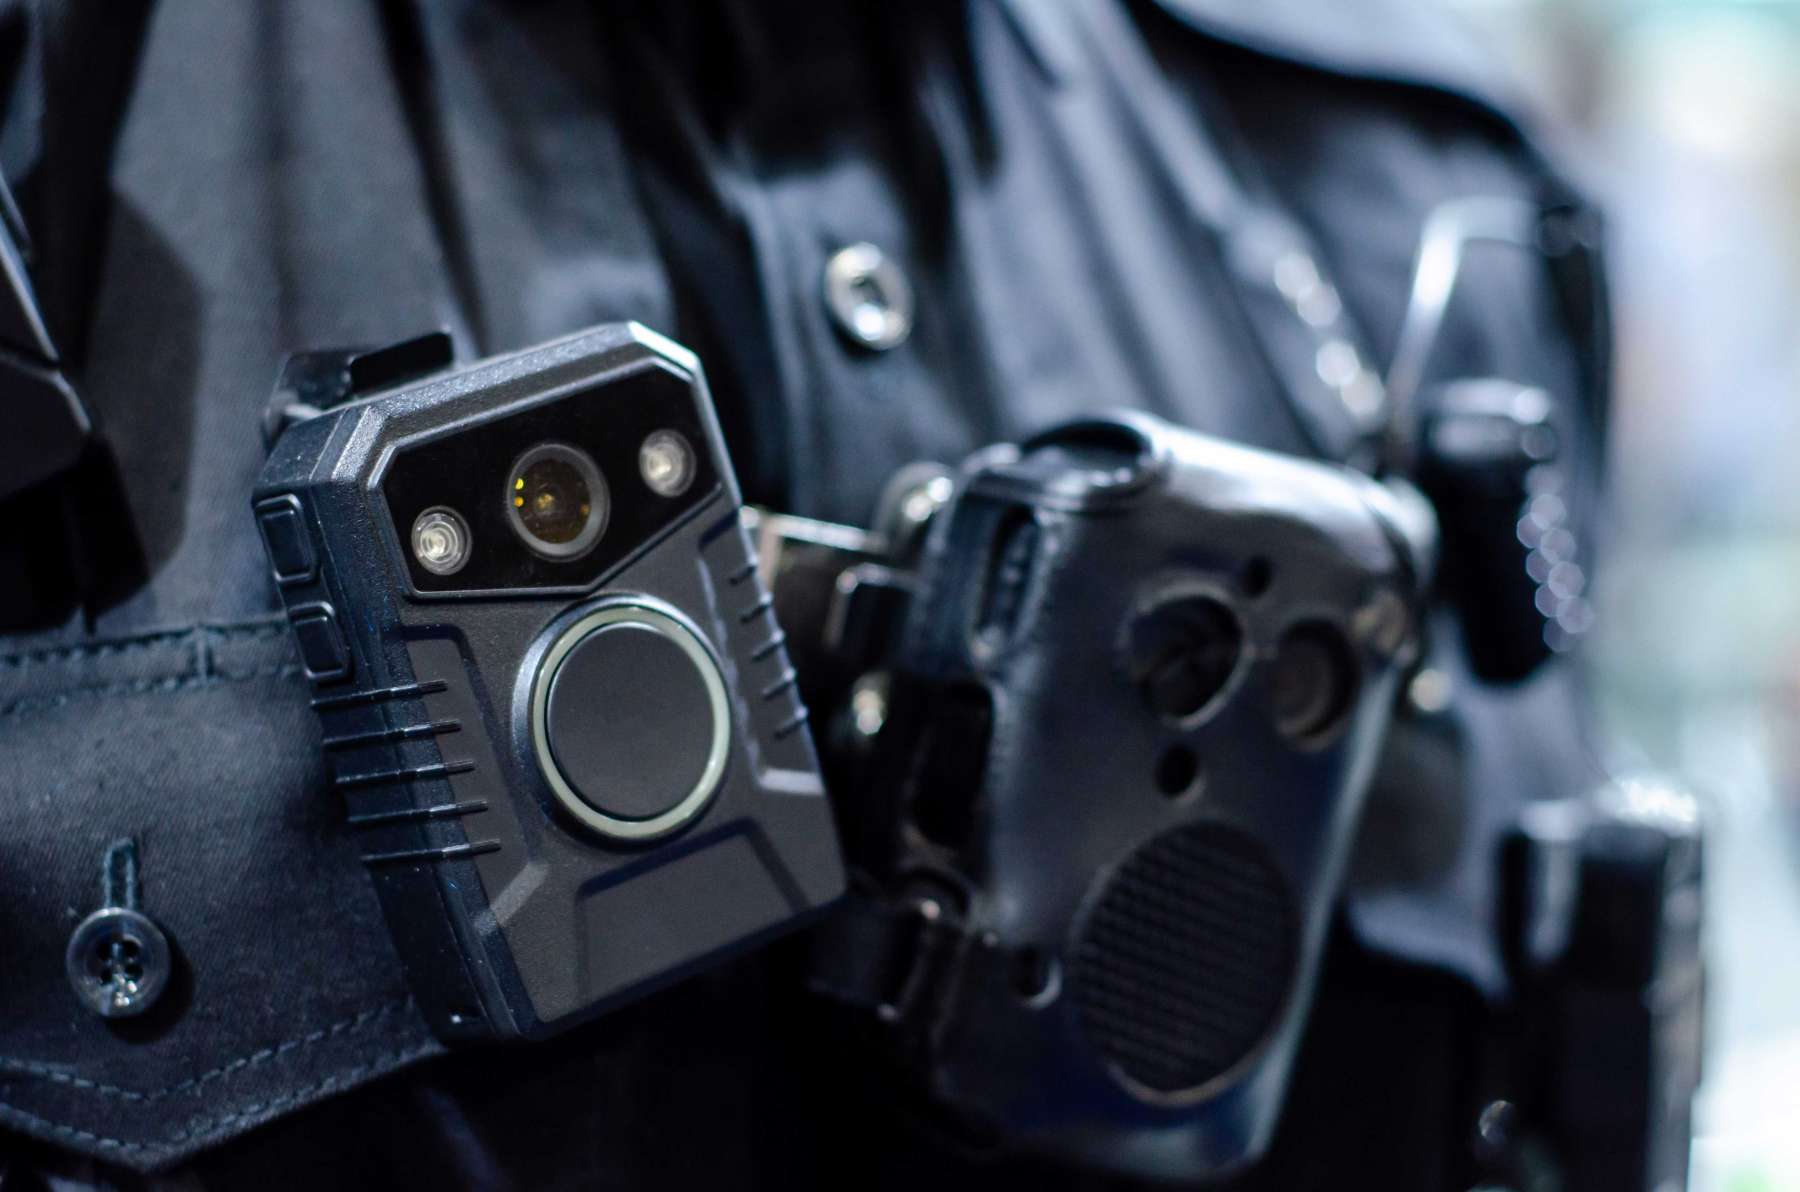 Student rights groups call on RI schools to reject body cameras for school resource officers